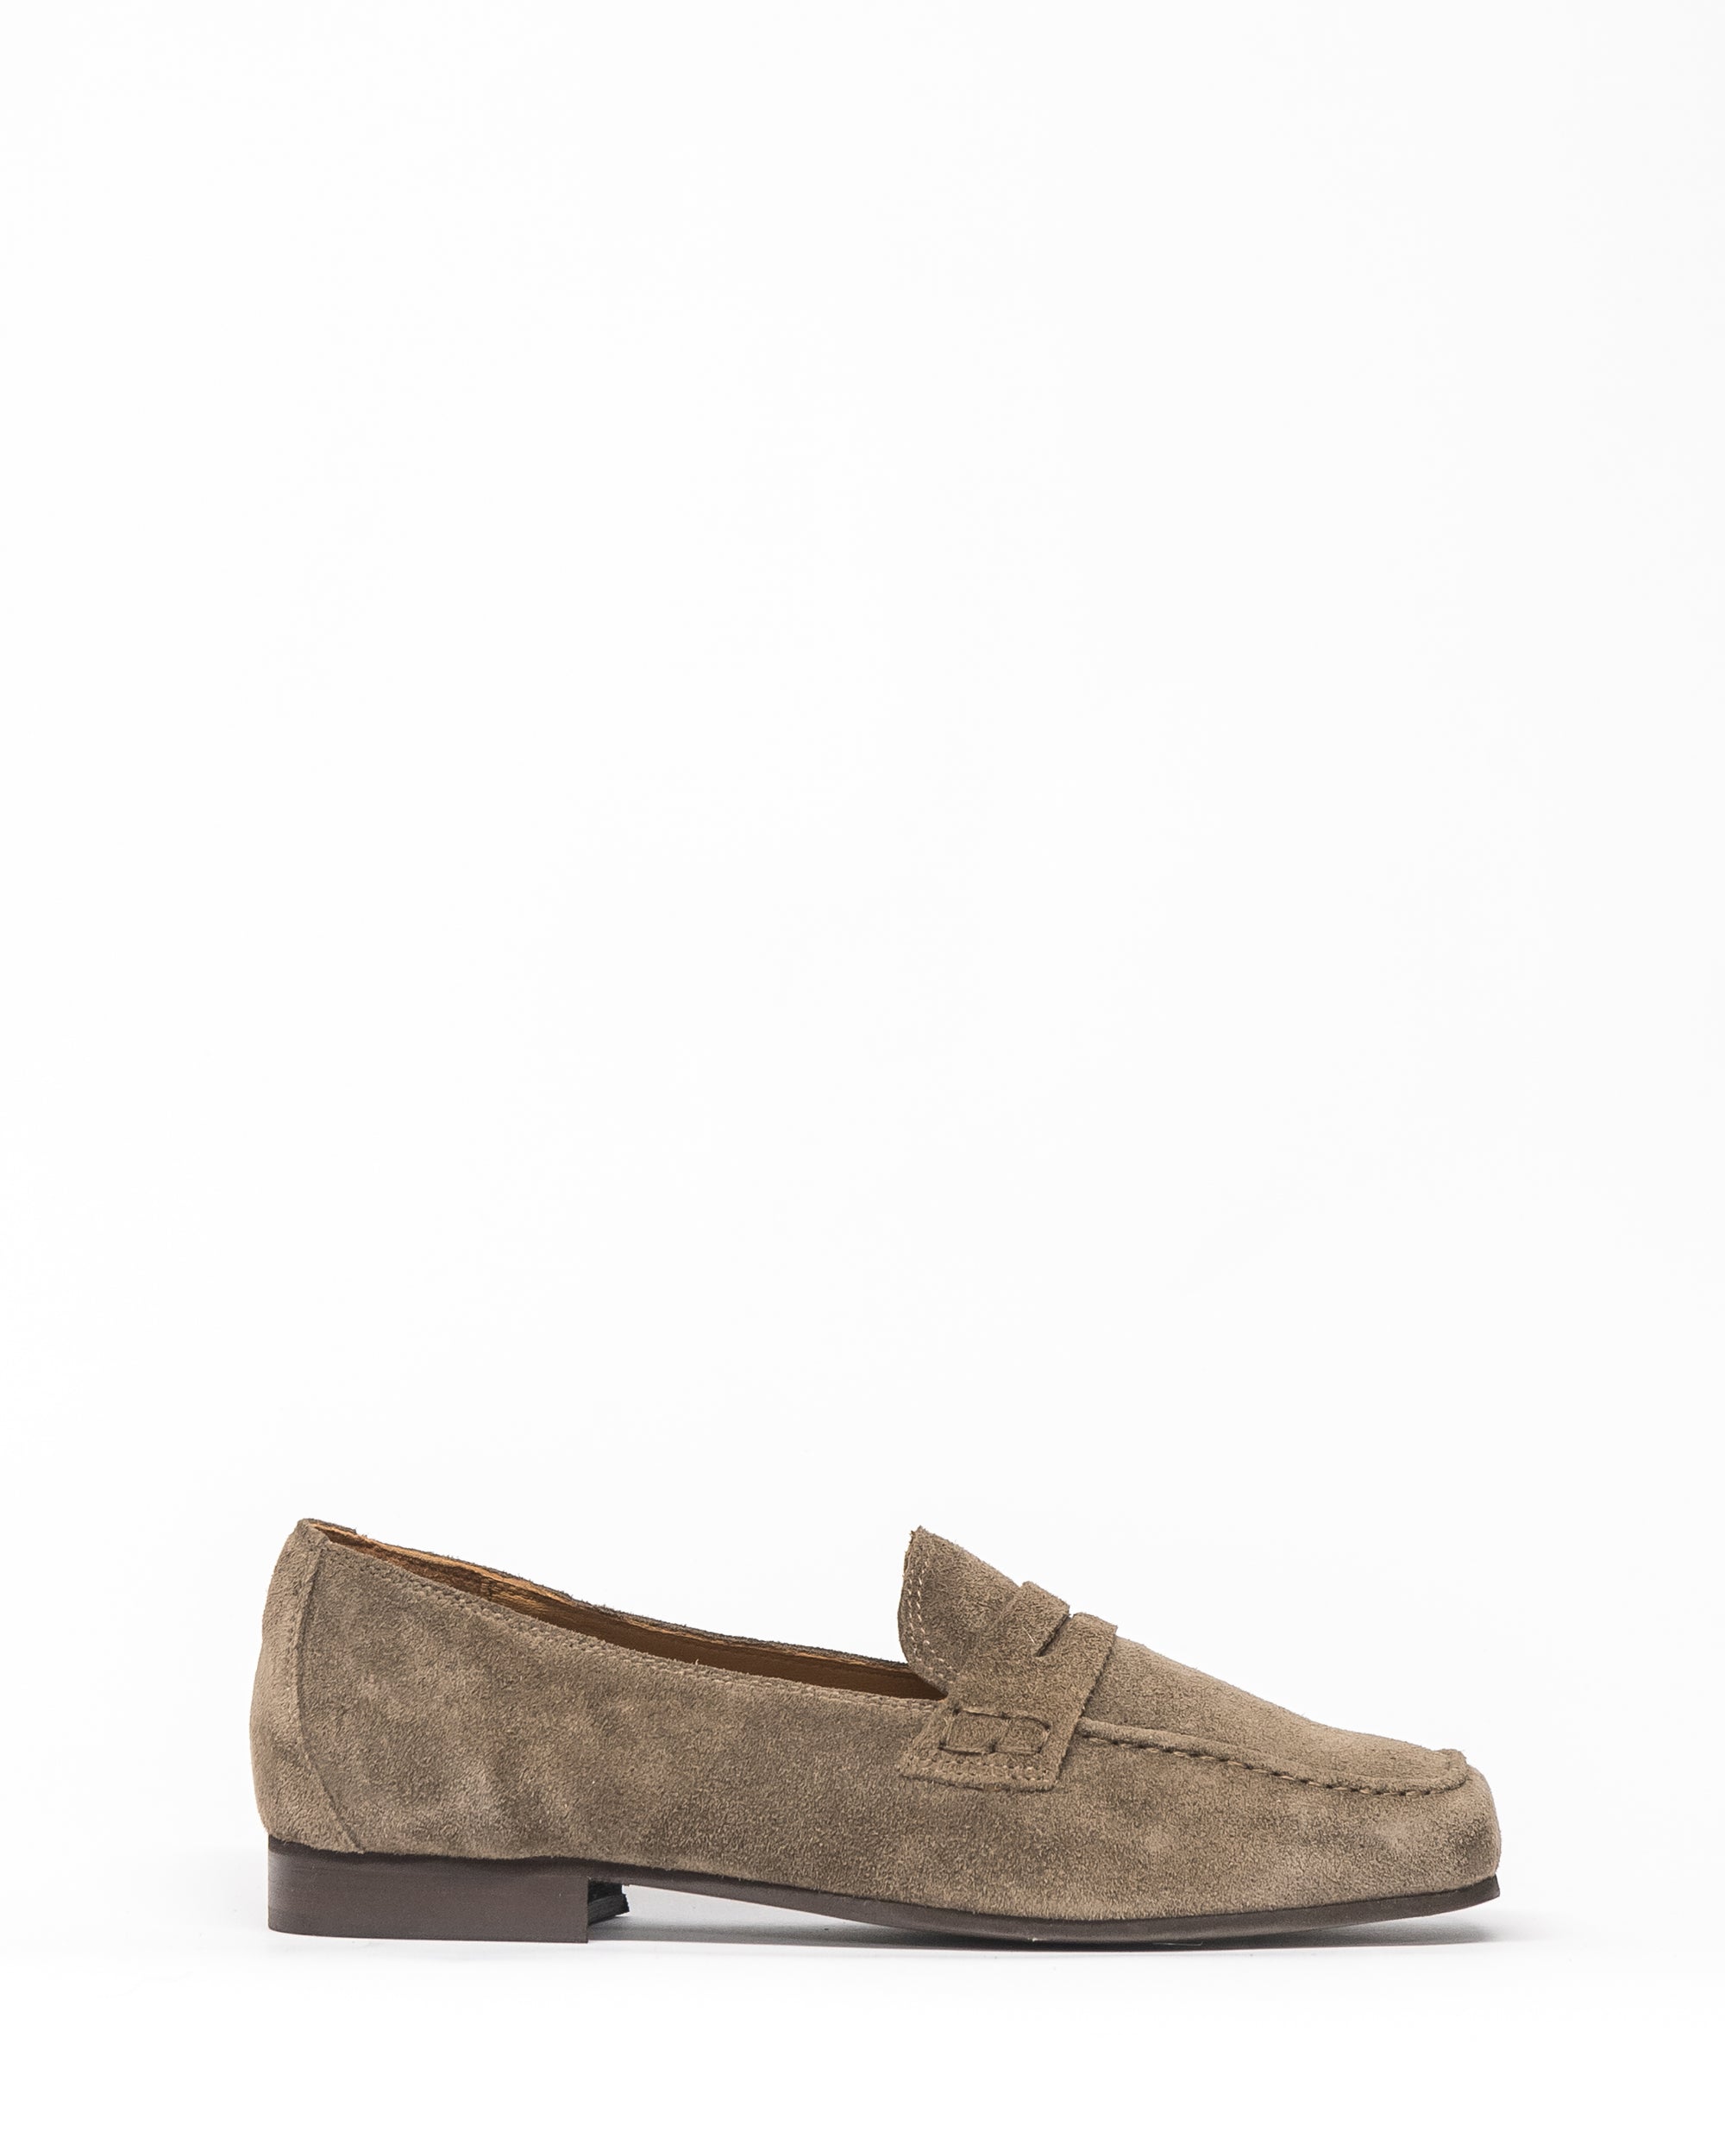 fare loafer - chocolate suede